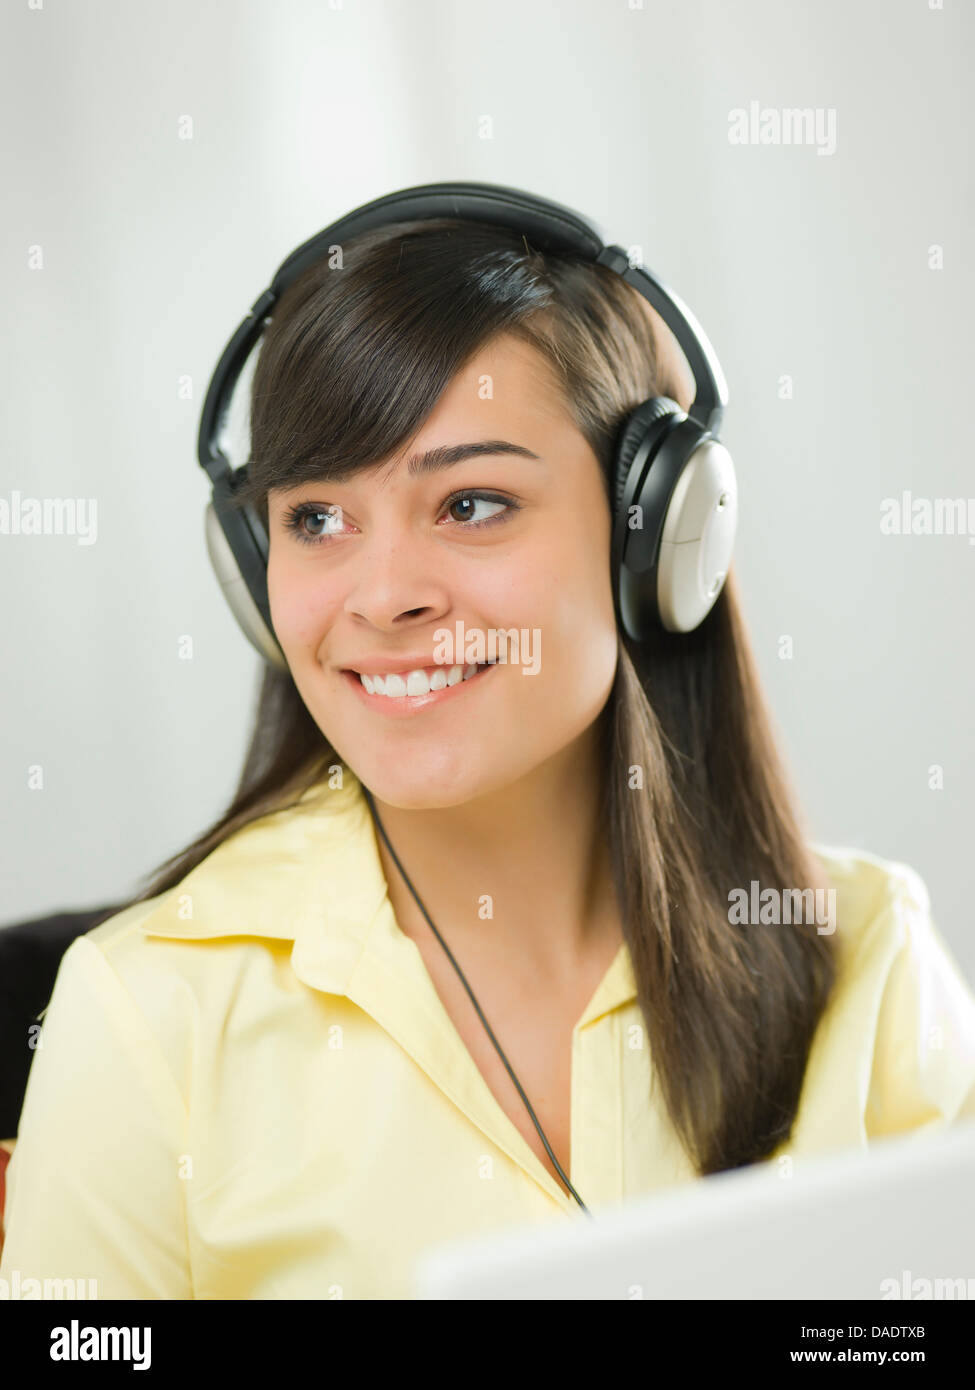 Young woman wearing headphones and smiling Stock Photo